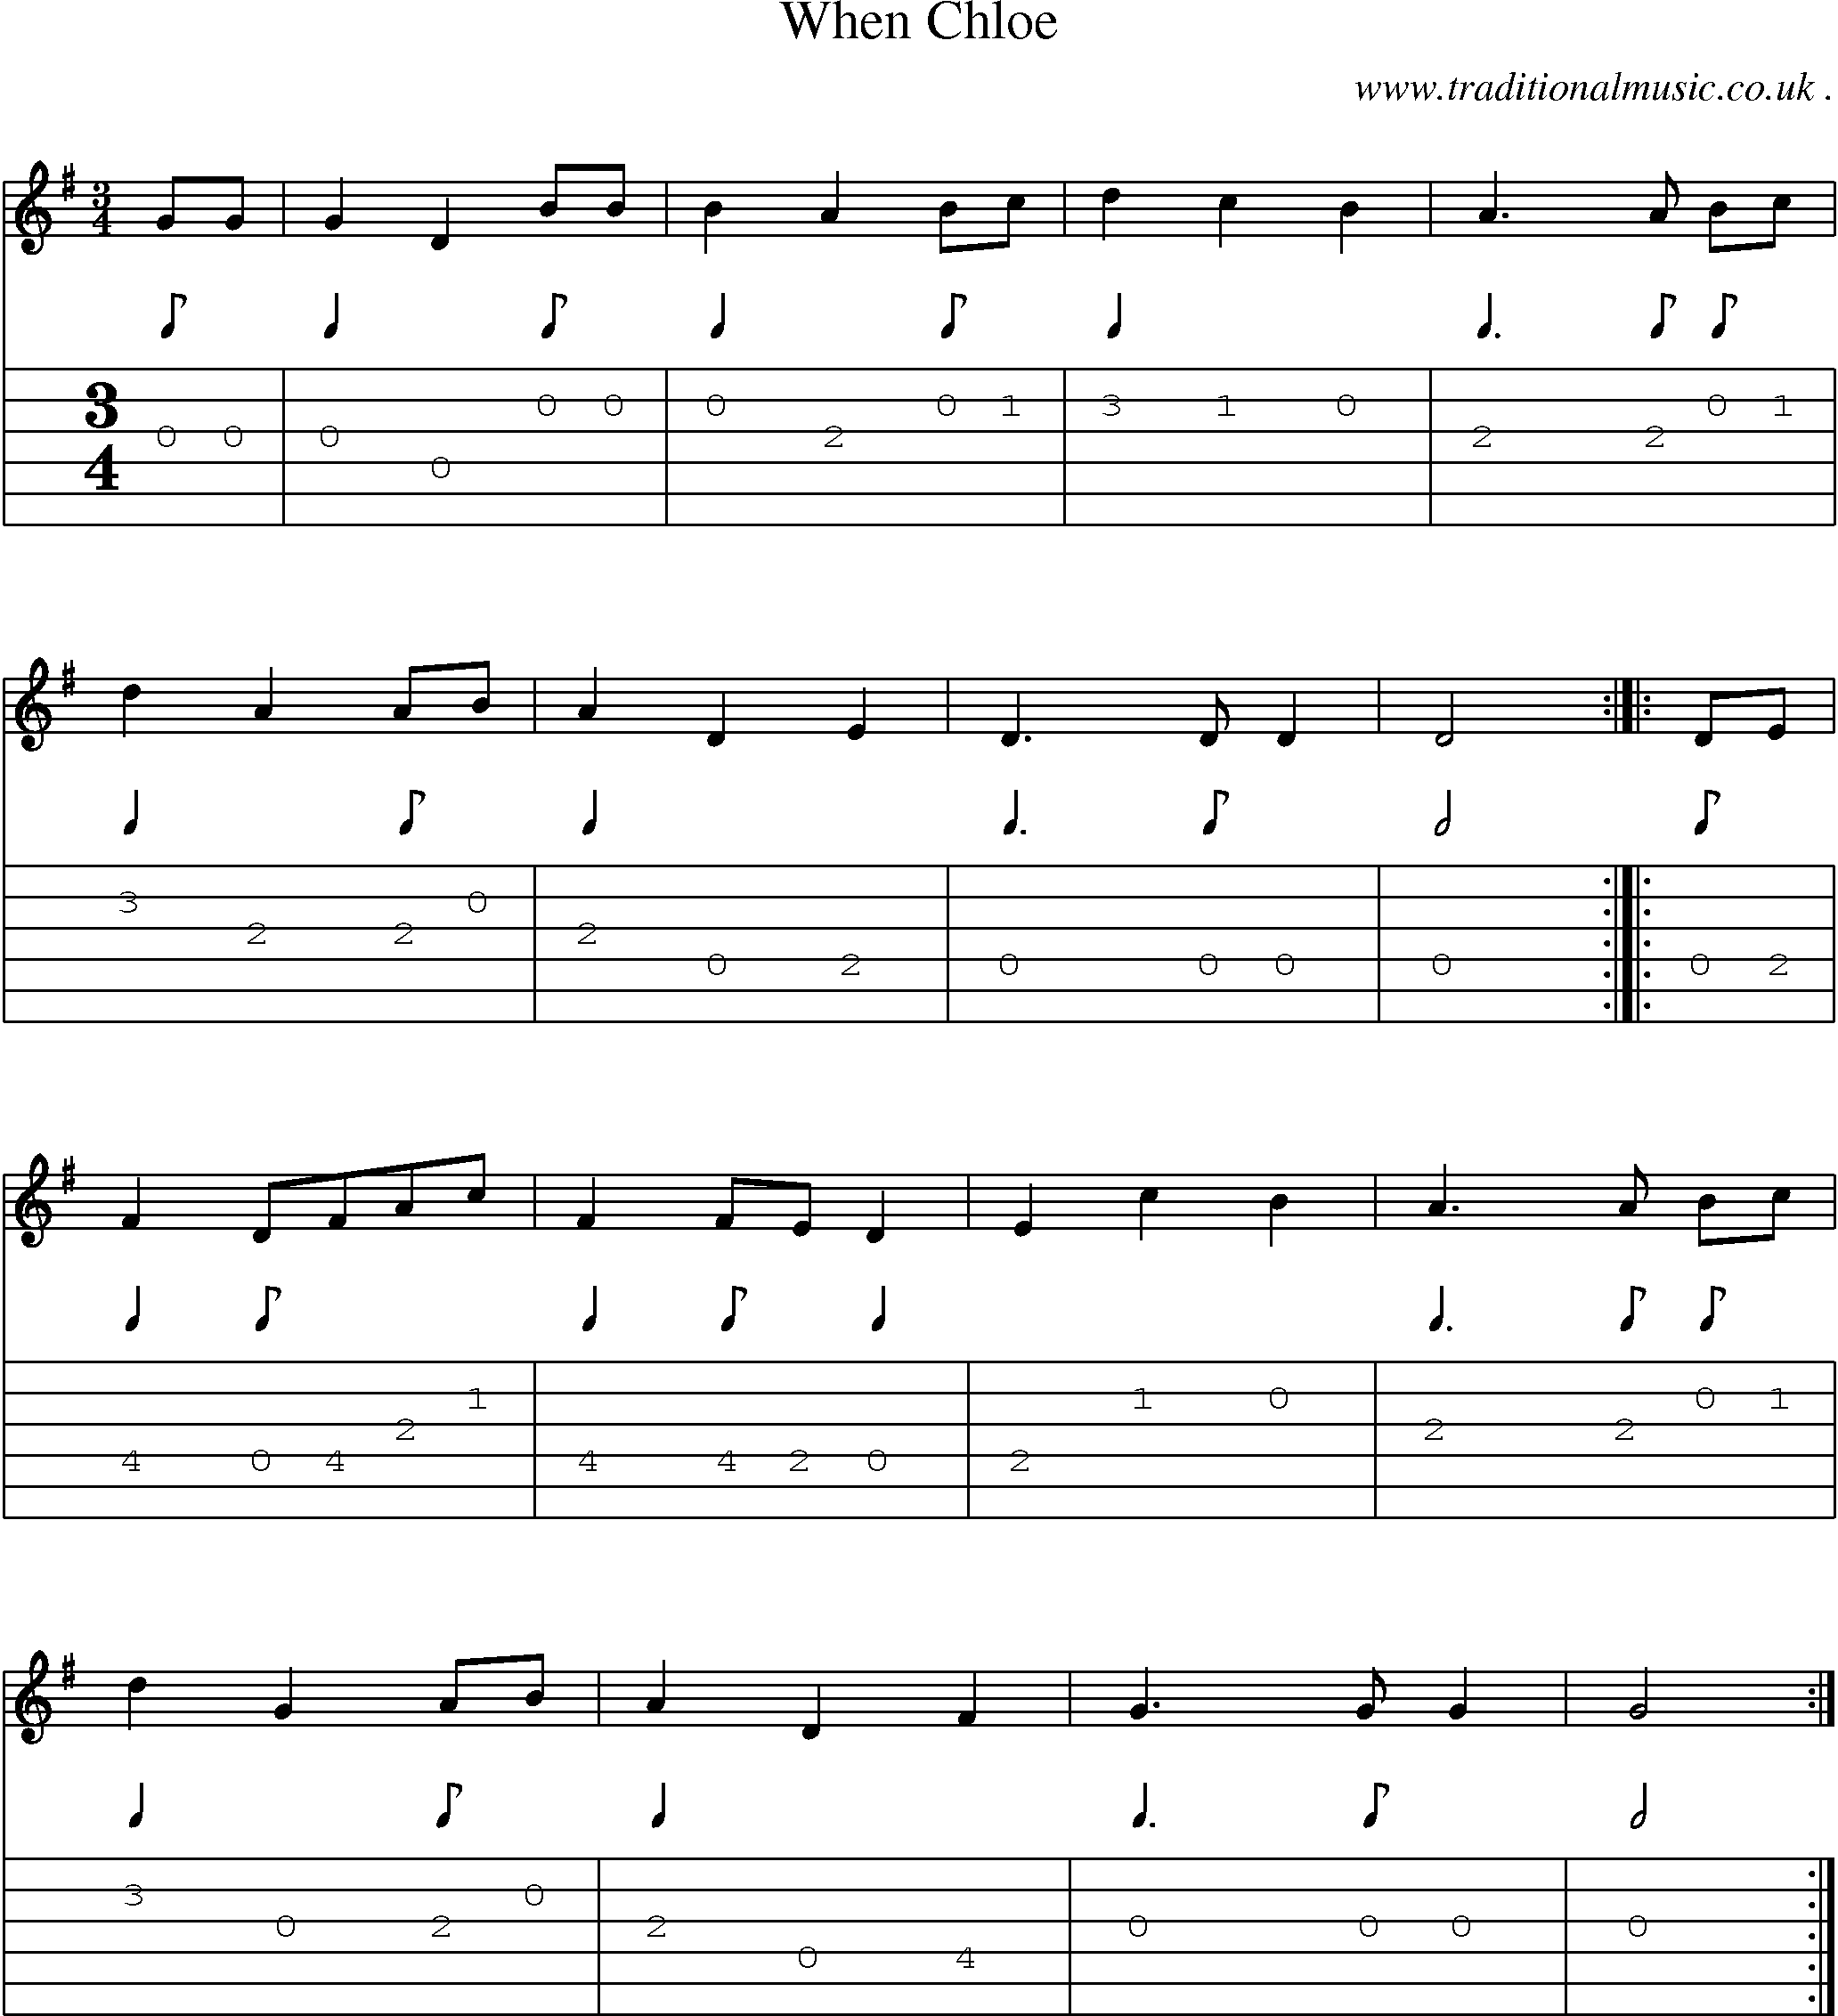 Sheet-Music and Guitar Tabs for When Chloe